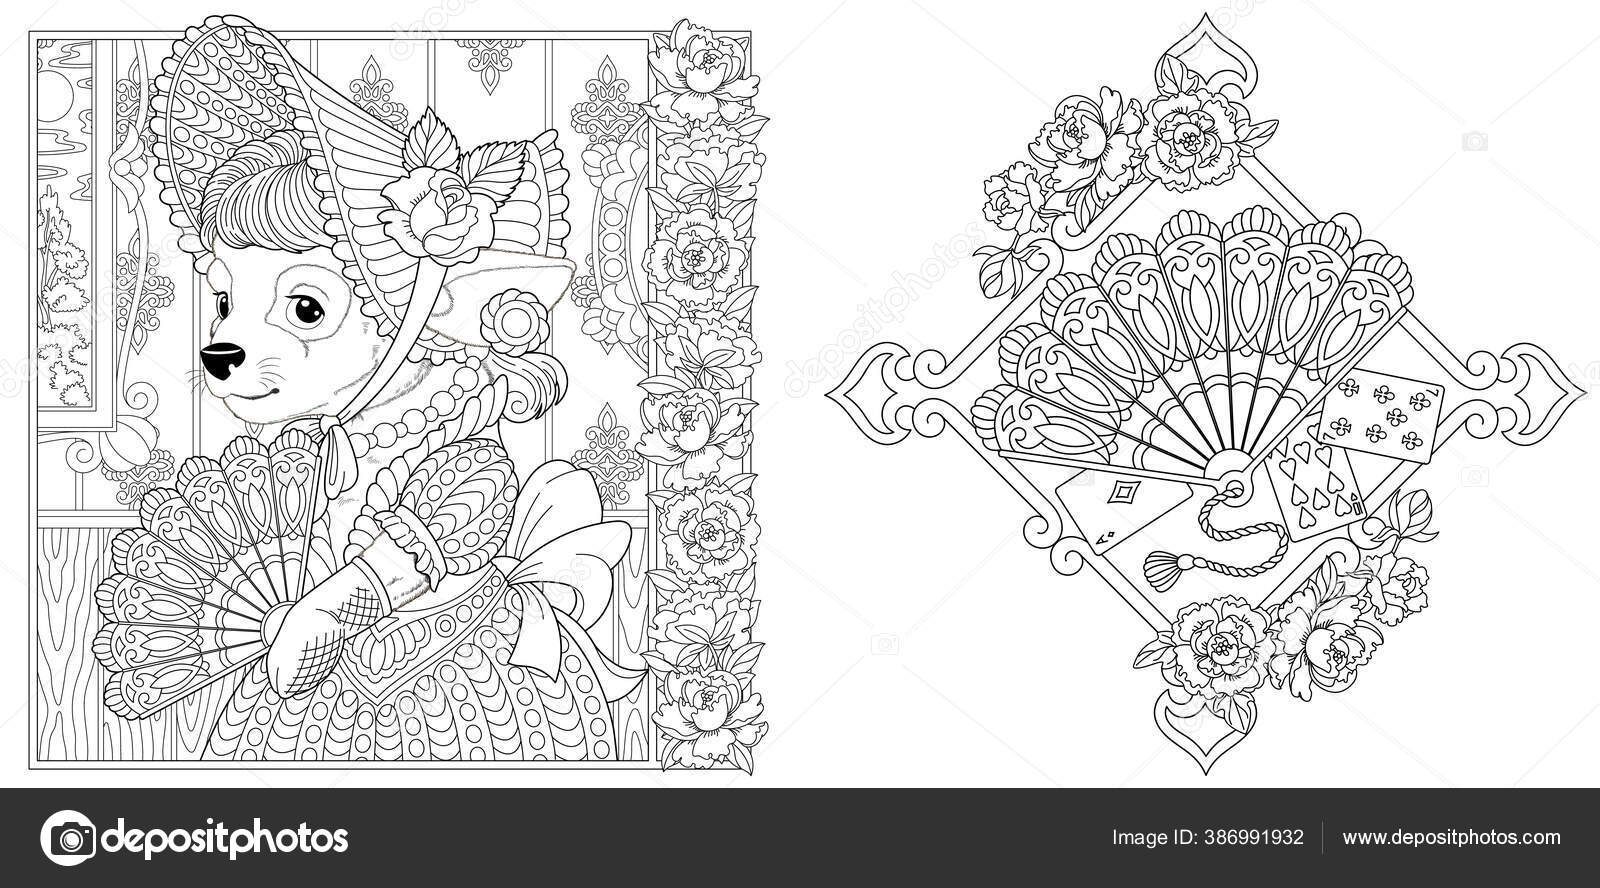 Coloring pages chihuahua dog girl vintage dress paper fan peony stock vector by sybirko